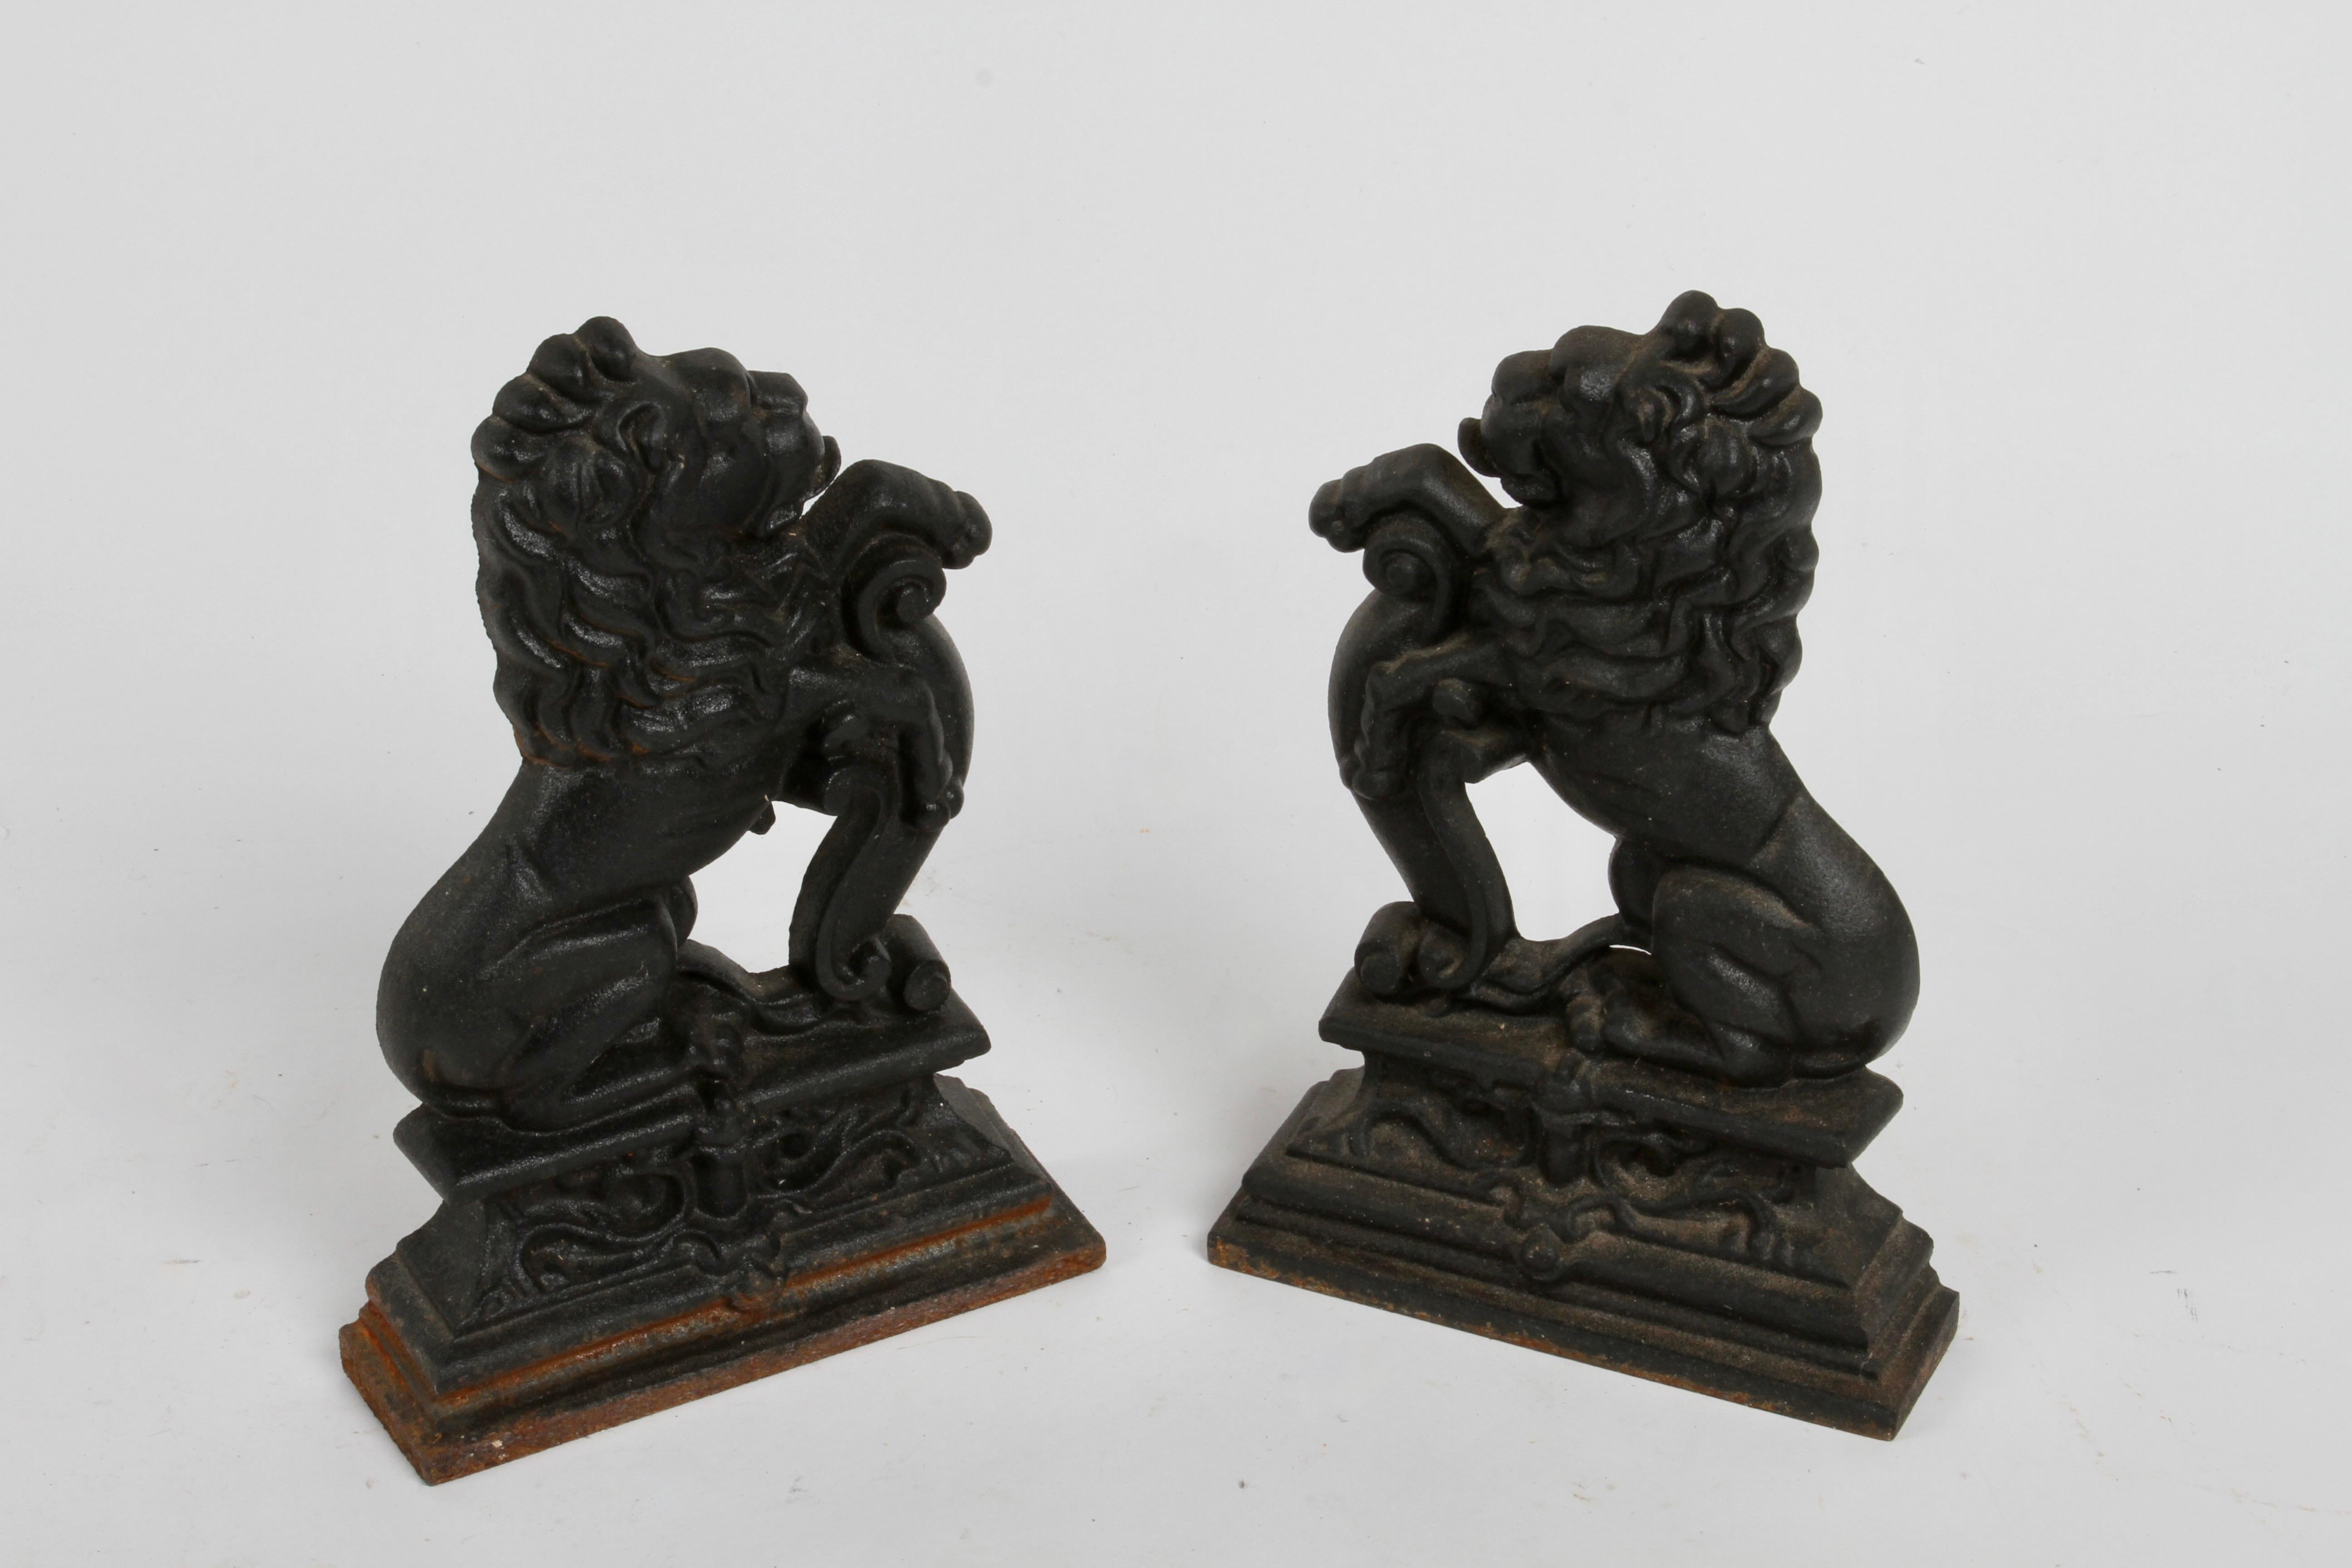 English Pair of Cast Iron Andirons or Fire Dogs of Rampant Lions Resting on Shield